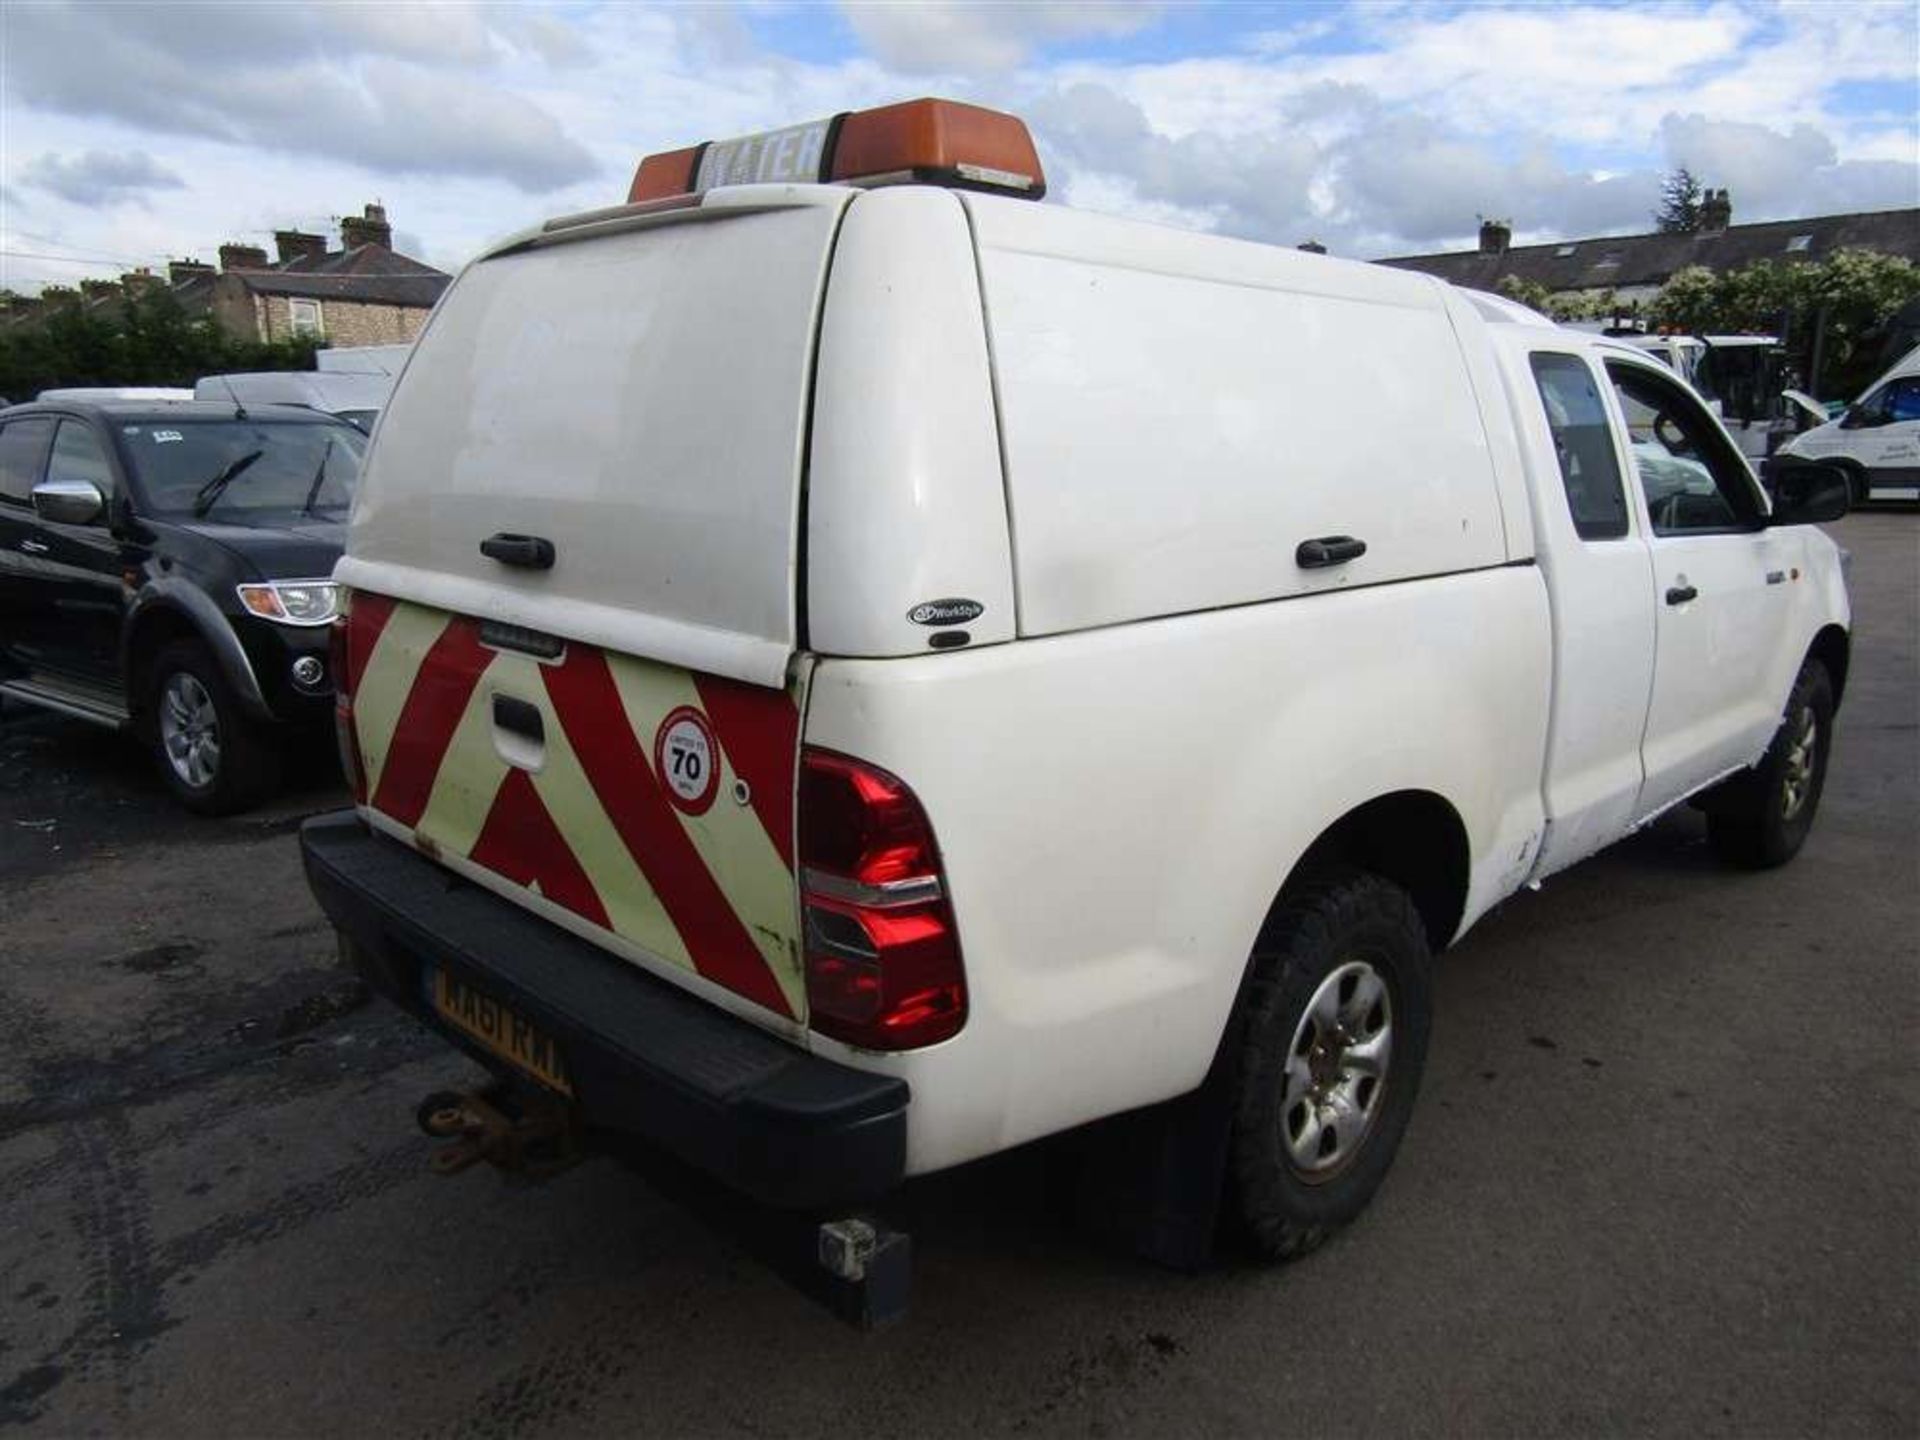 2011 61 reg Toyota Hilux HL2 D-4D 4x4 ECB (Direct United Utilities Water) - Image 4 of 6